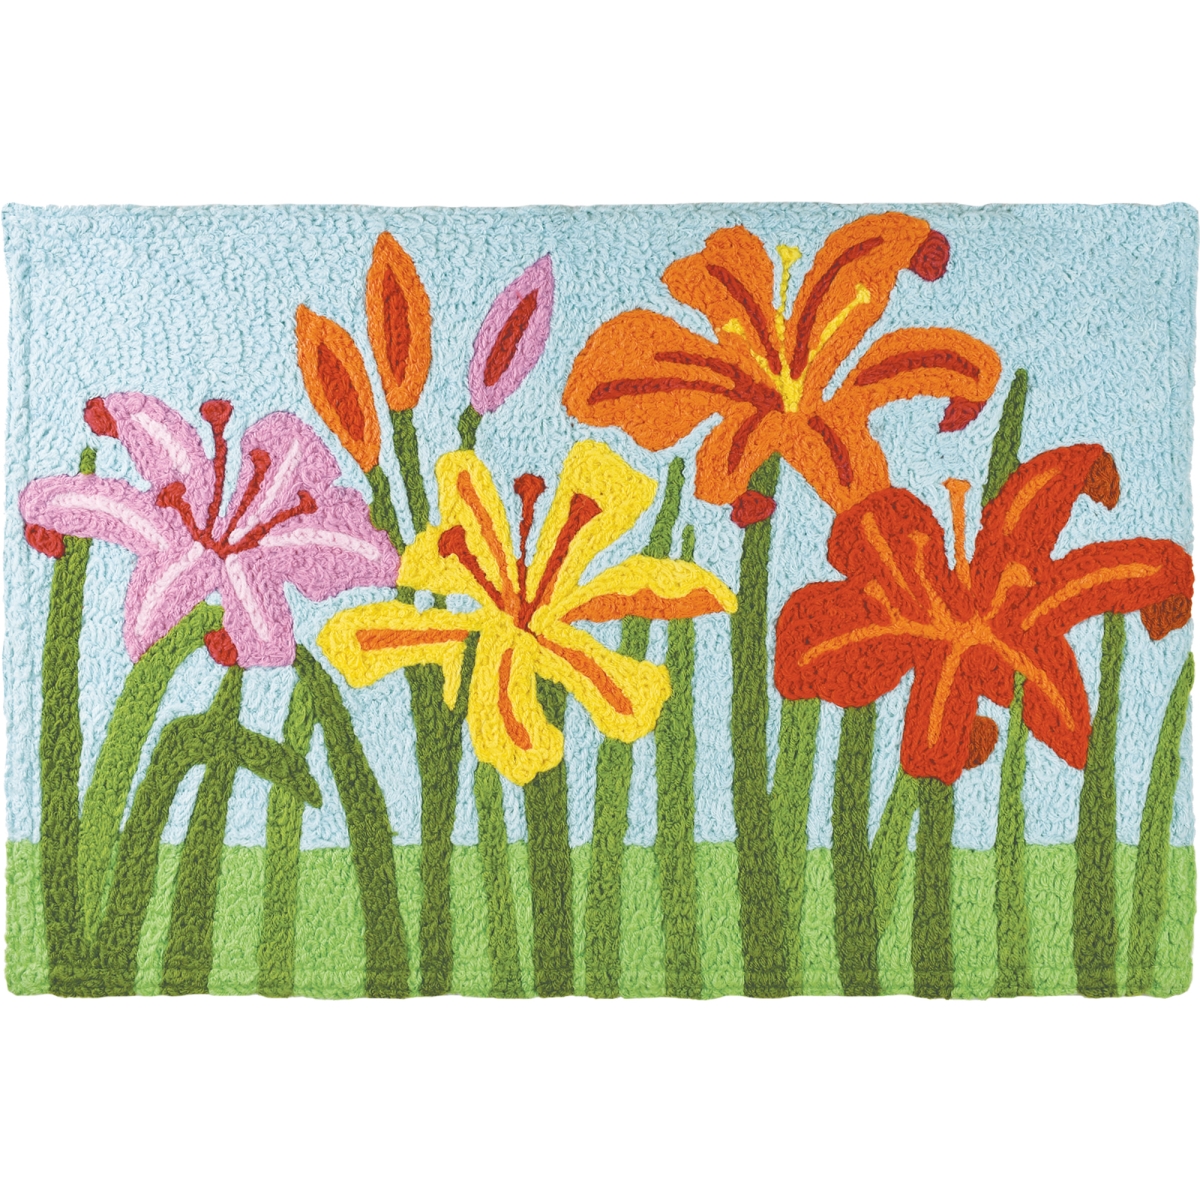 Jb-tf011 20 X 30 In. Day Lillies Rug